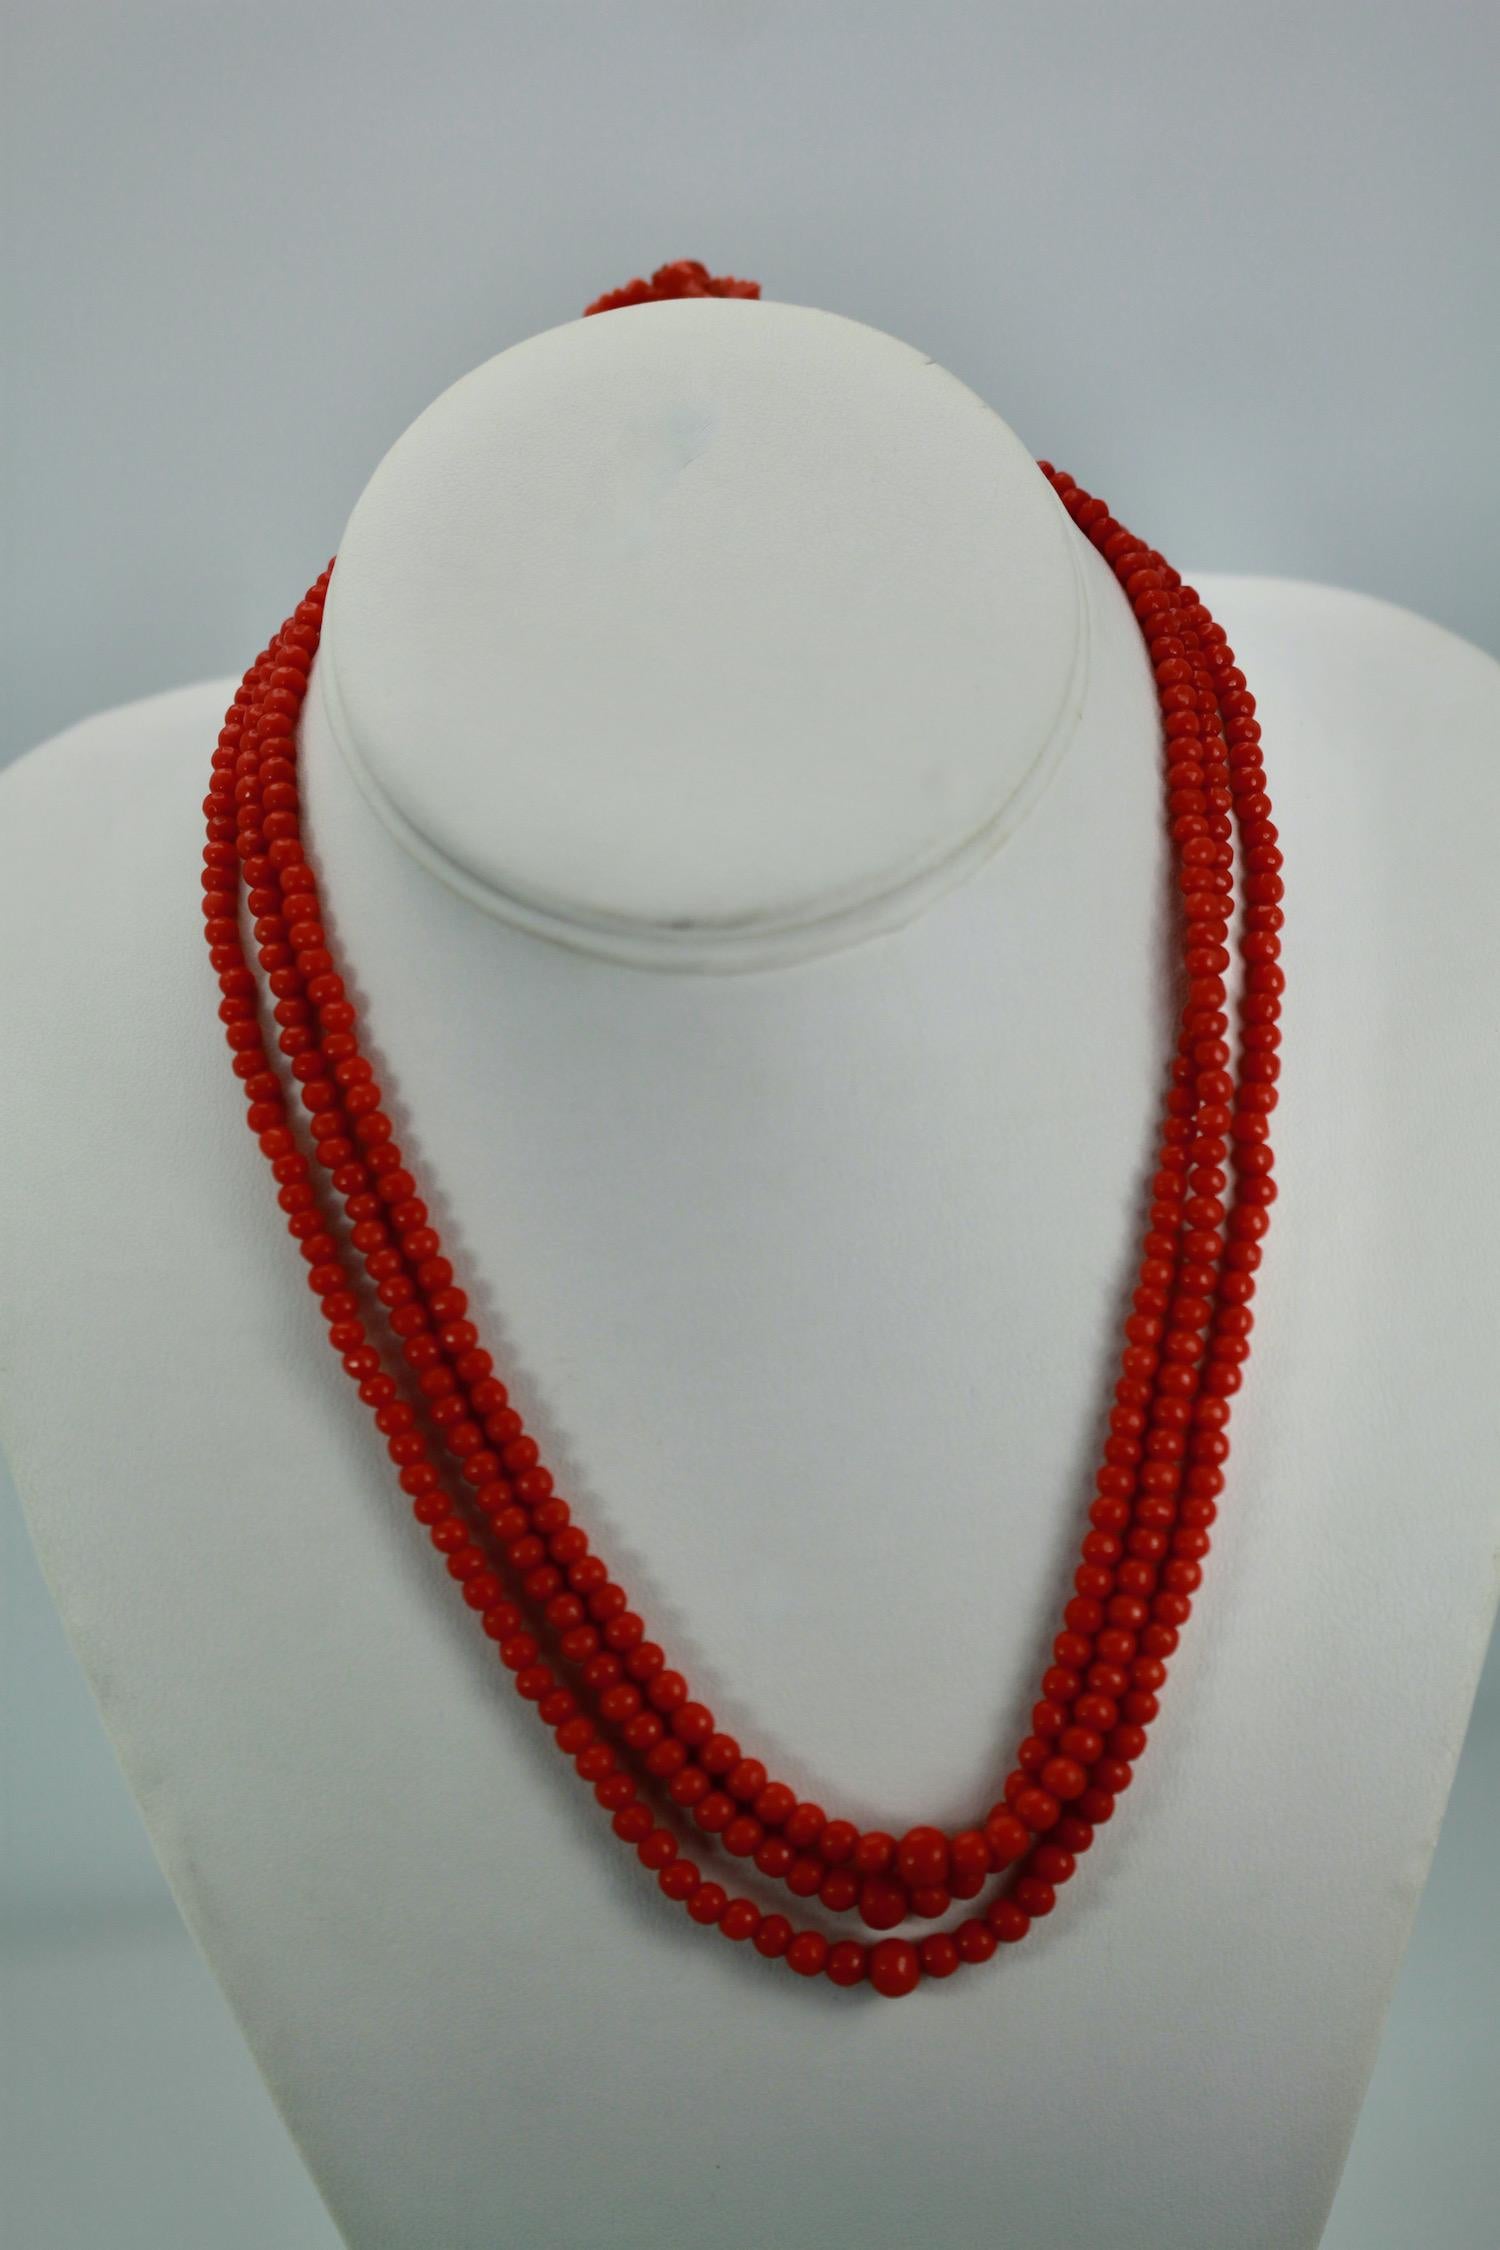 Antique 14k Coral Necklace with Carved Bacchus Head In Good Condition For Sale In North Hollywood, CA